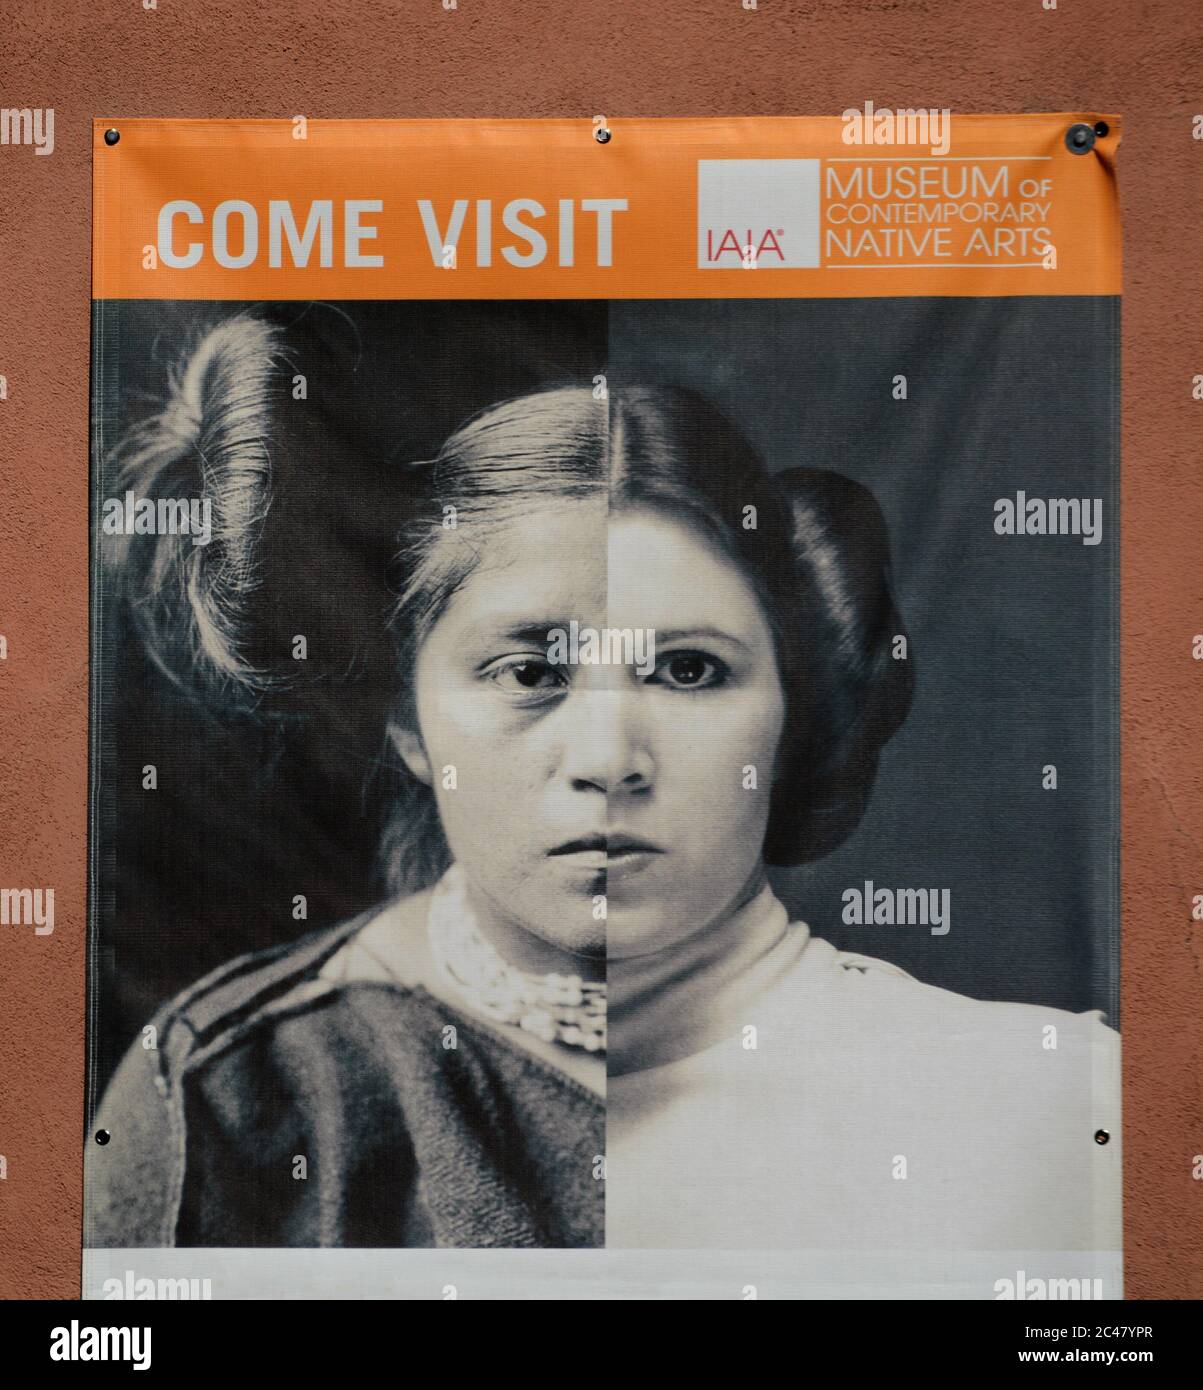 A mural hanging on the front of a Native-American art museum features a creative combination of photos of an historic Hopi girl and Princess Leia. Stock Photo